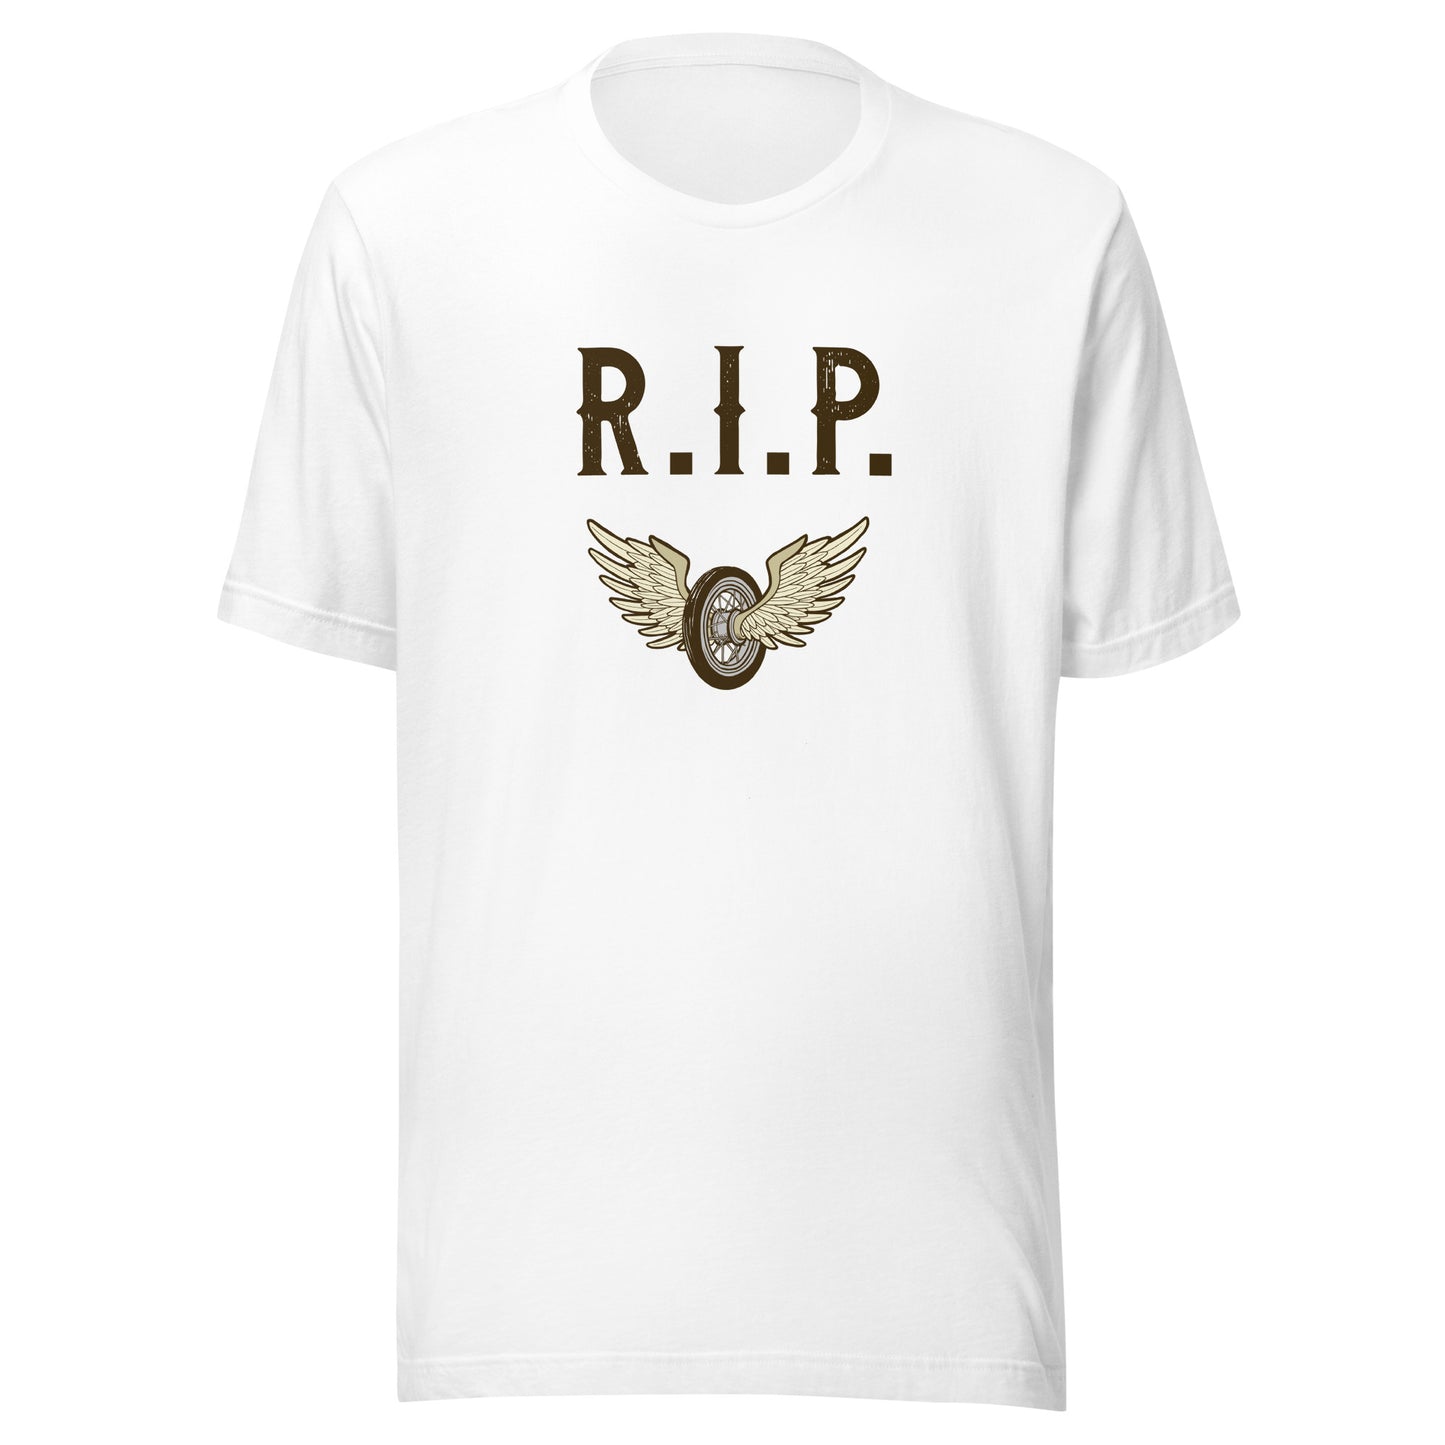 R.I.P. t-shirt For Motorcyclists